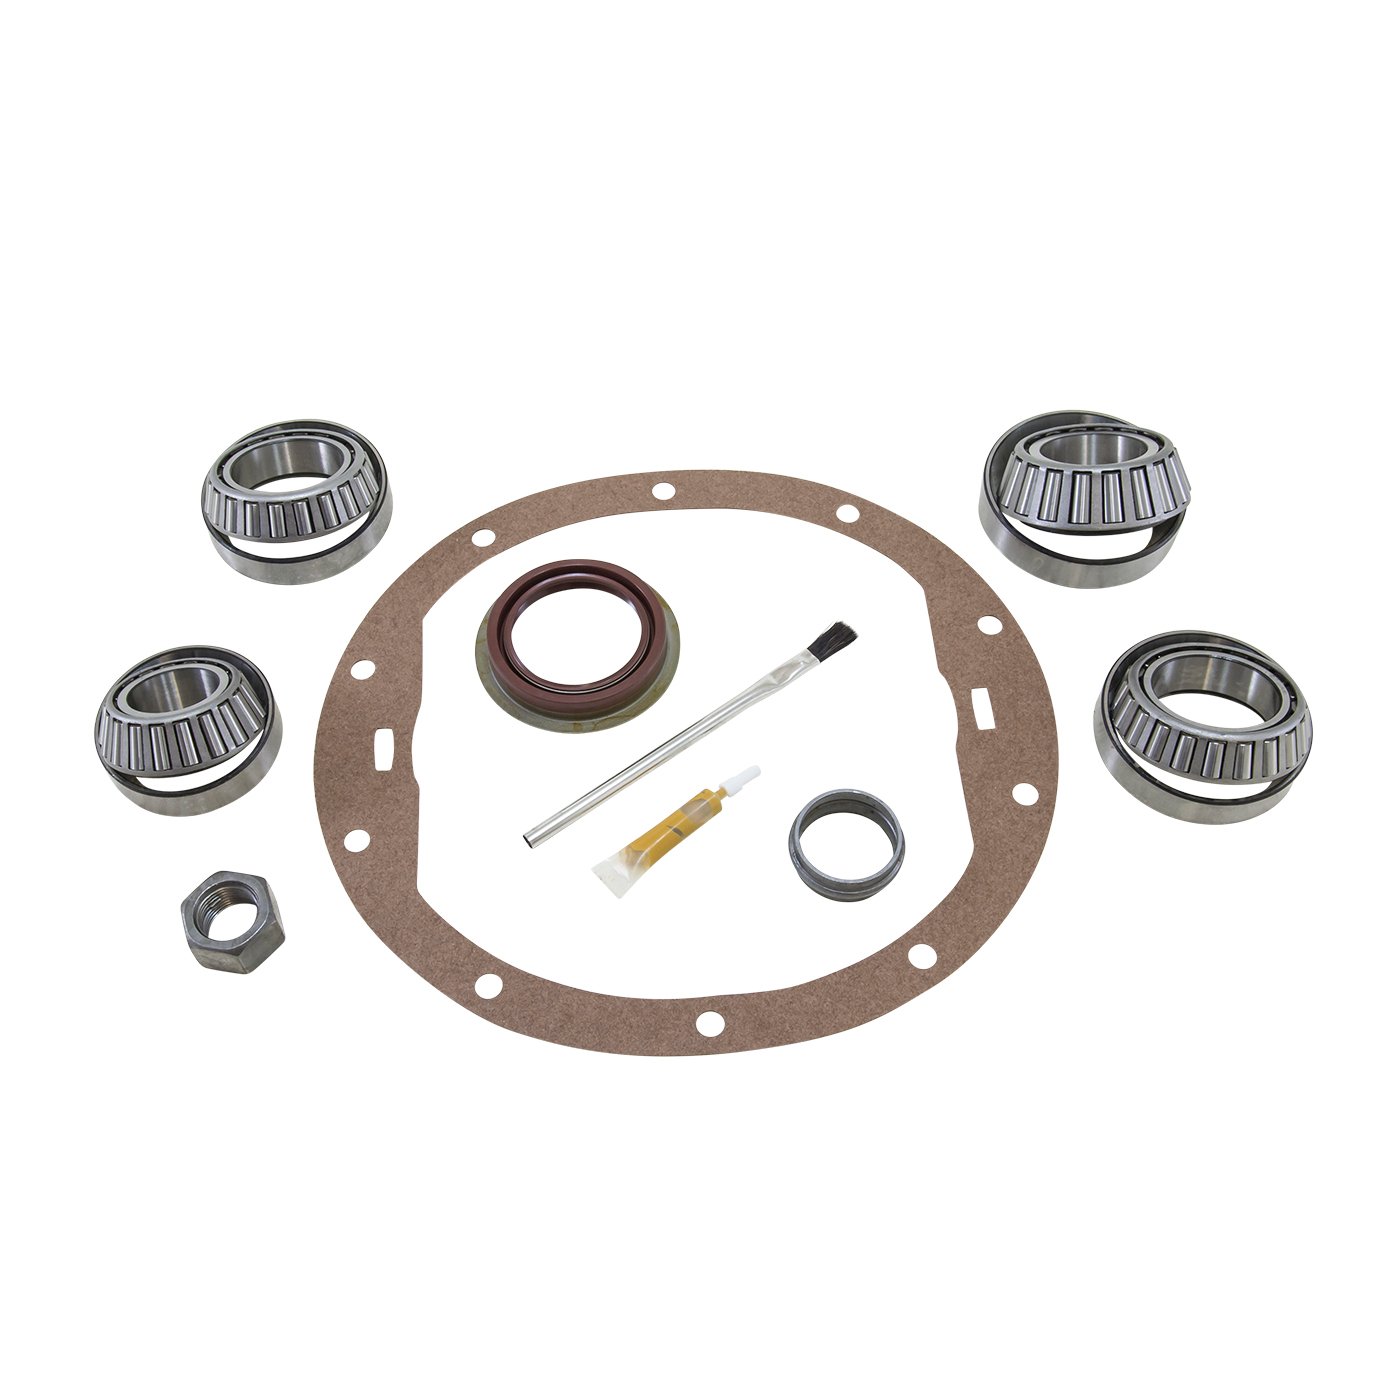 Bearing Installation Kit For GM 12 Bolt Truck Differential